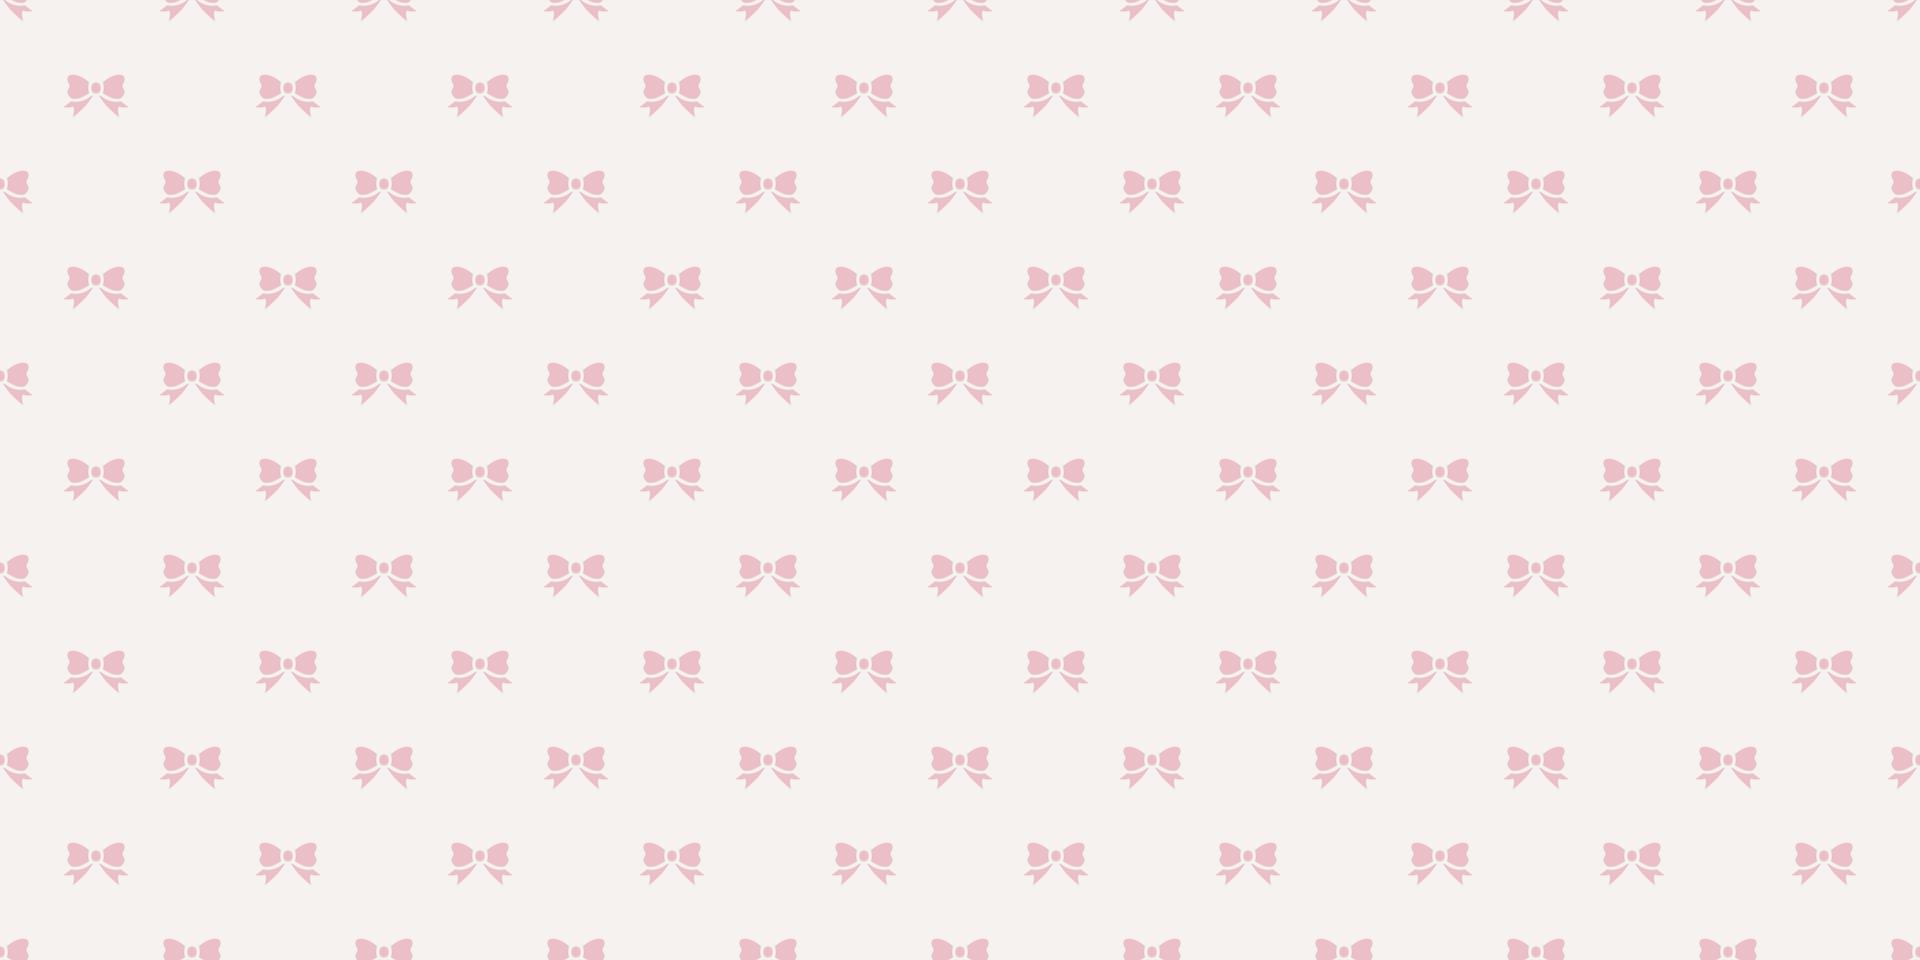 Bow seamless repeat pattern background. vector